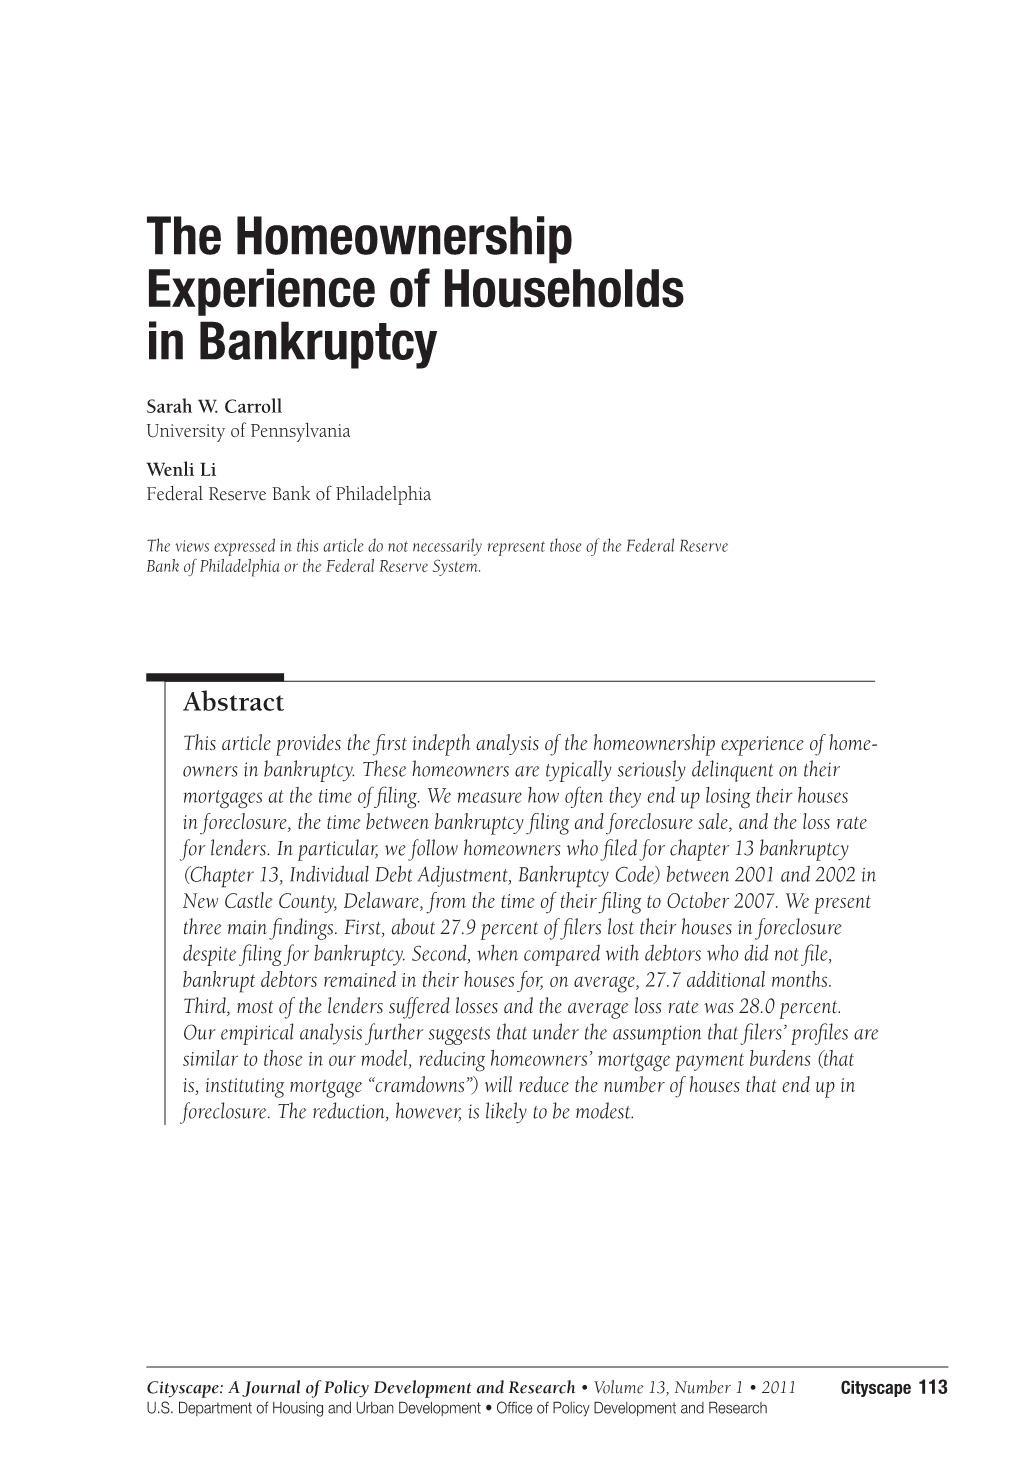 The Homeownership Experience of Households in Bankruptcy